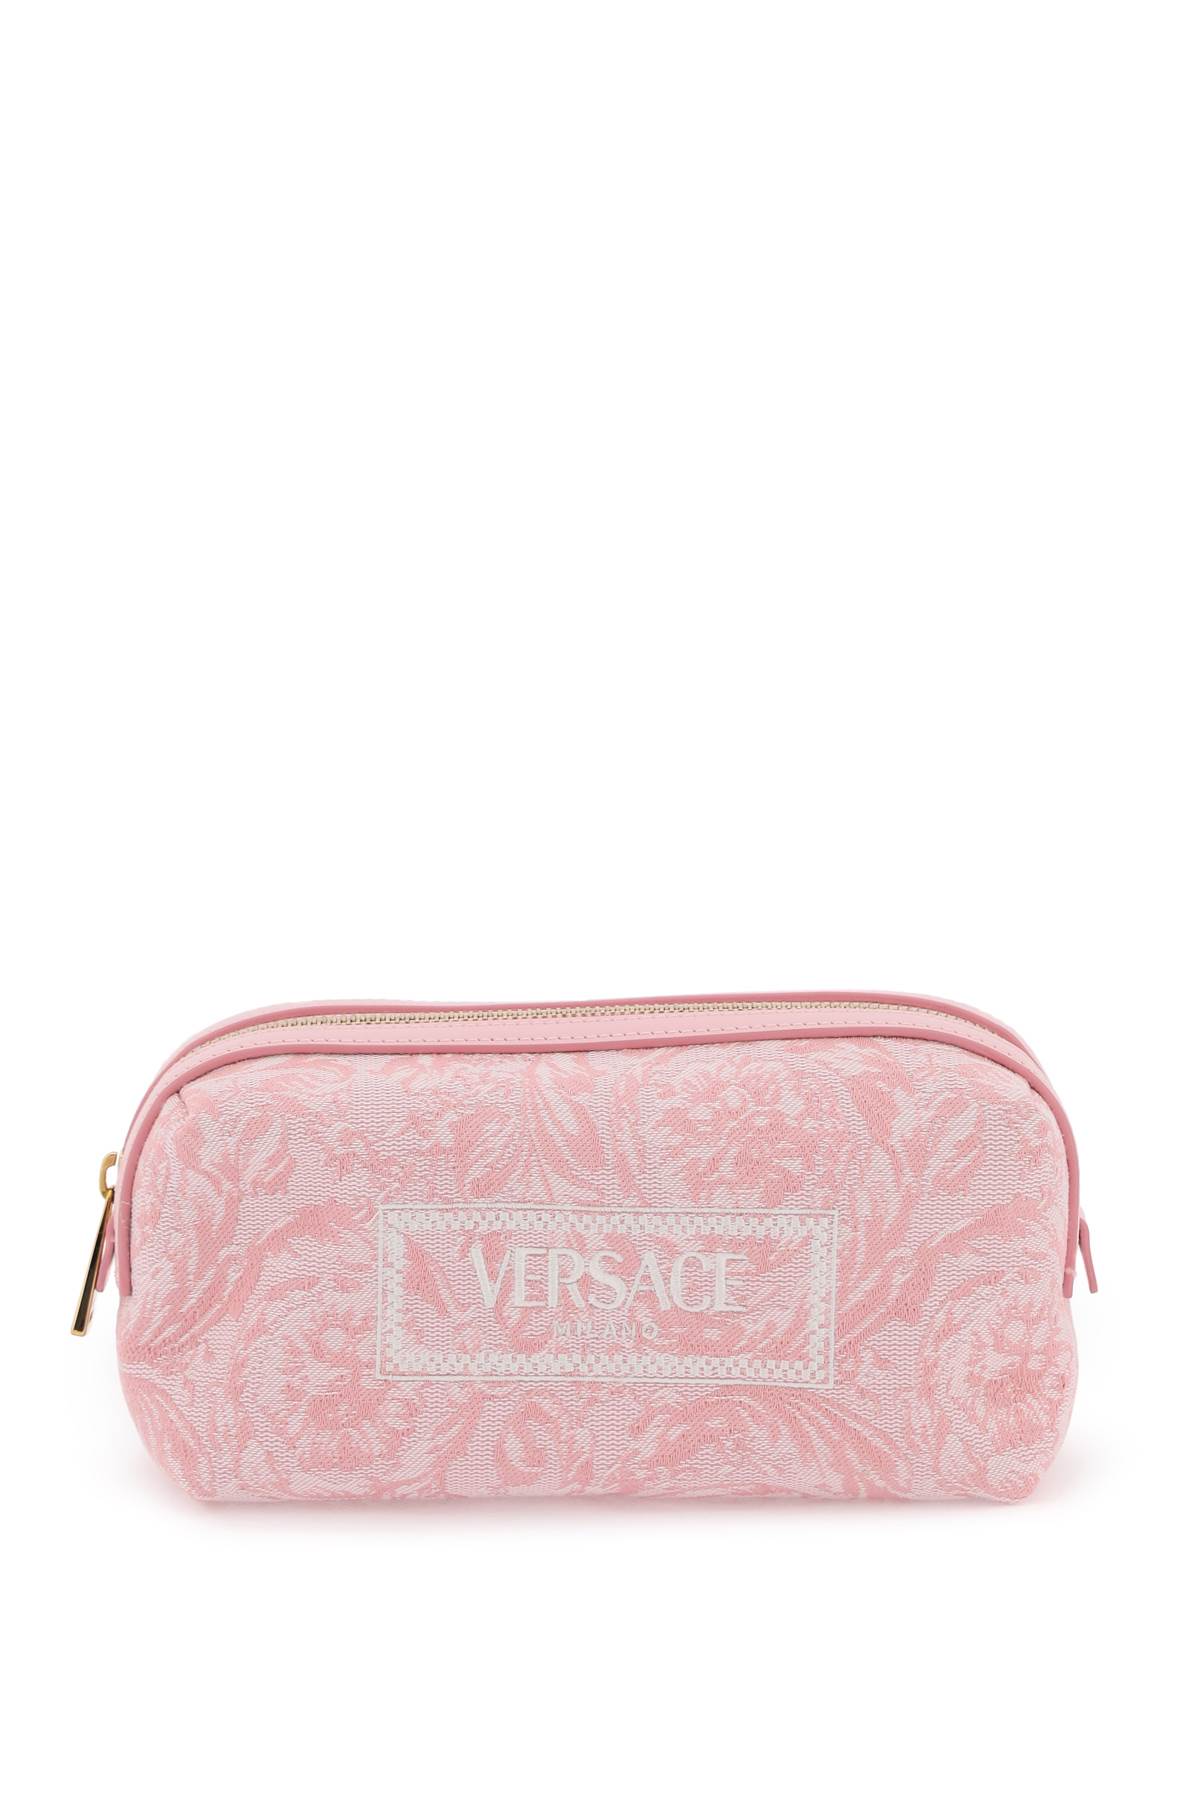 Versace Barocco Vanity Case In Pale Pink English Rose Ve (pink)